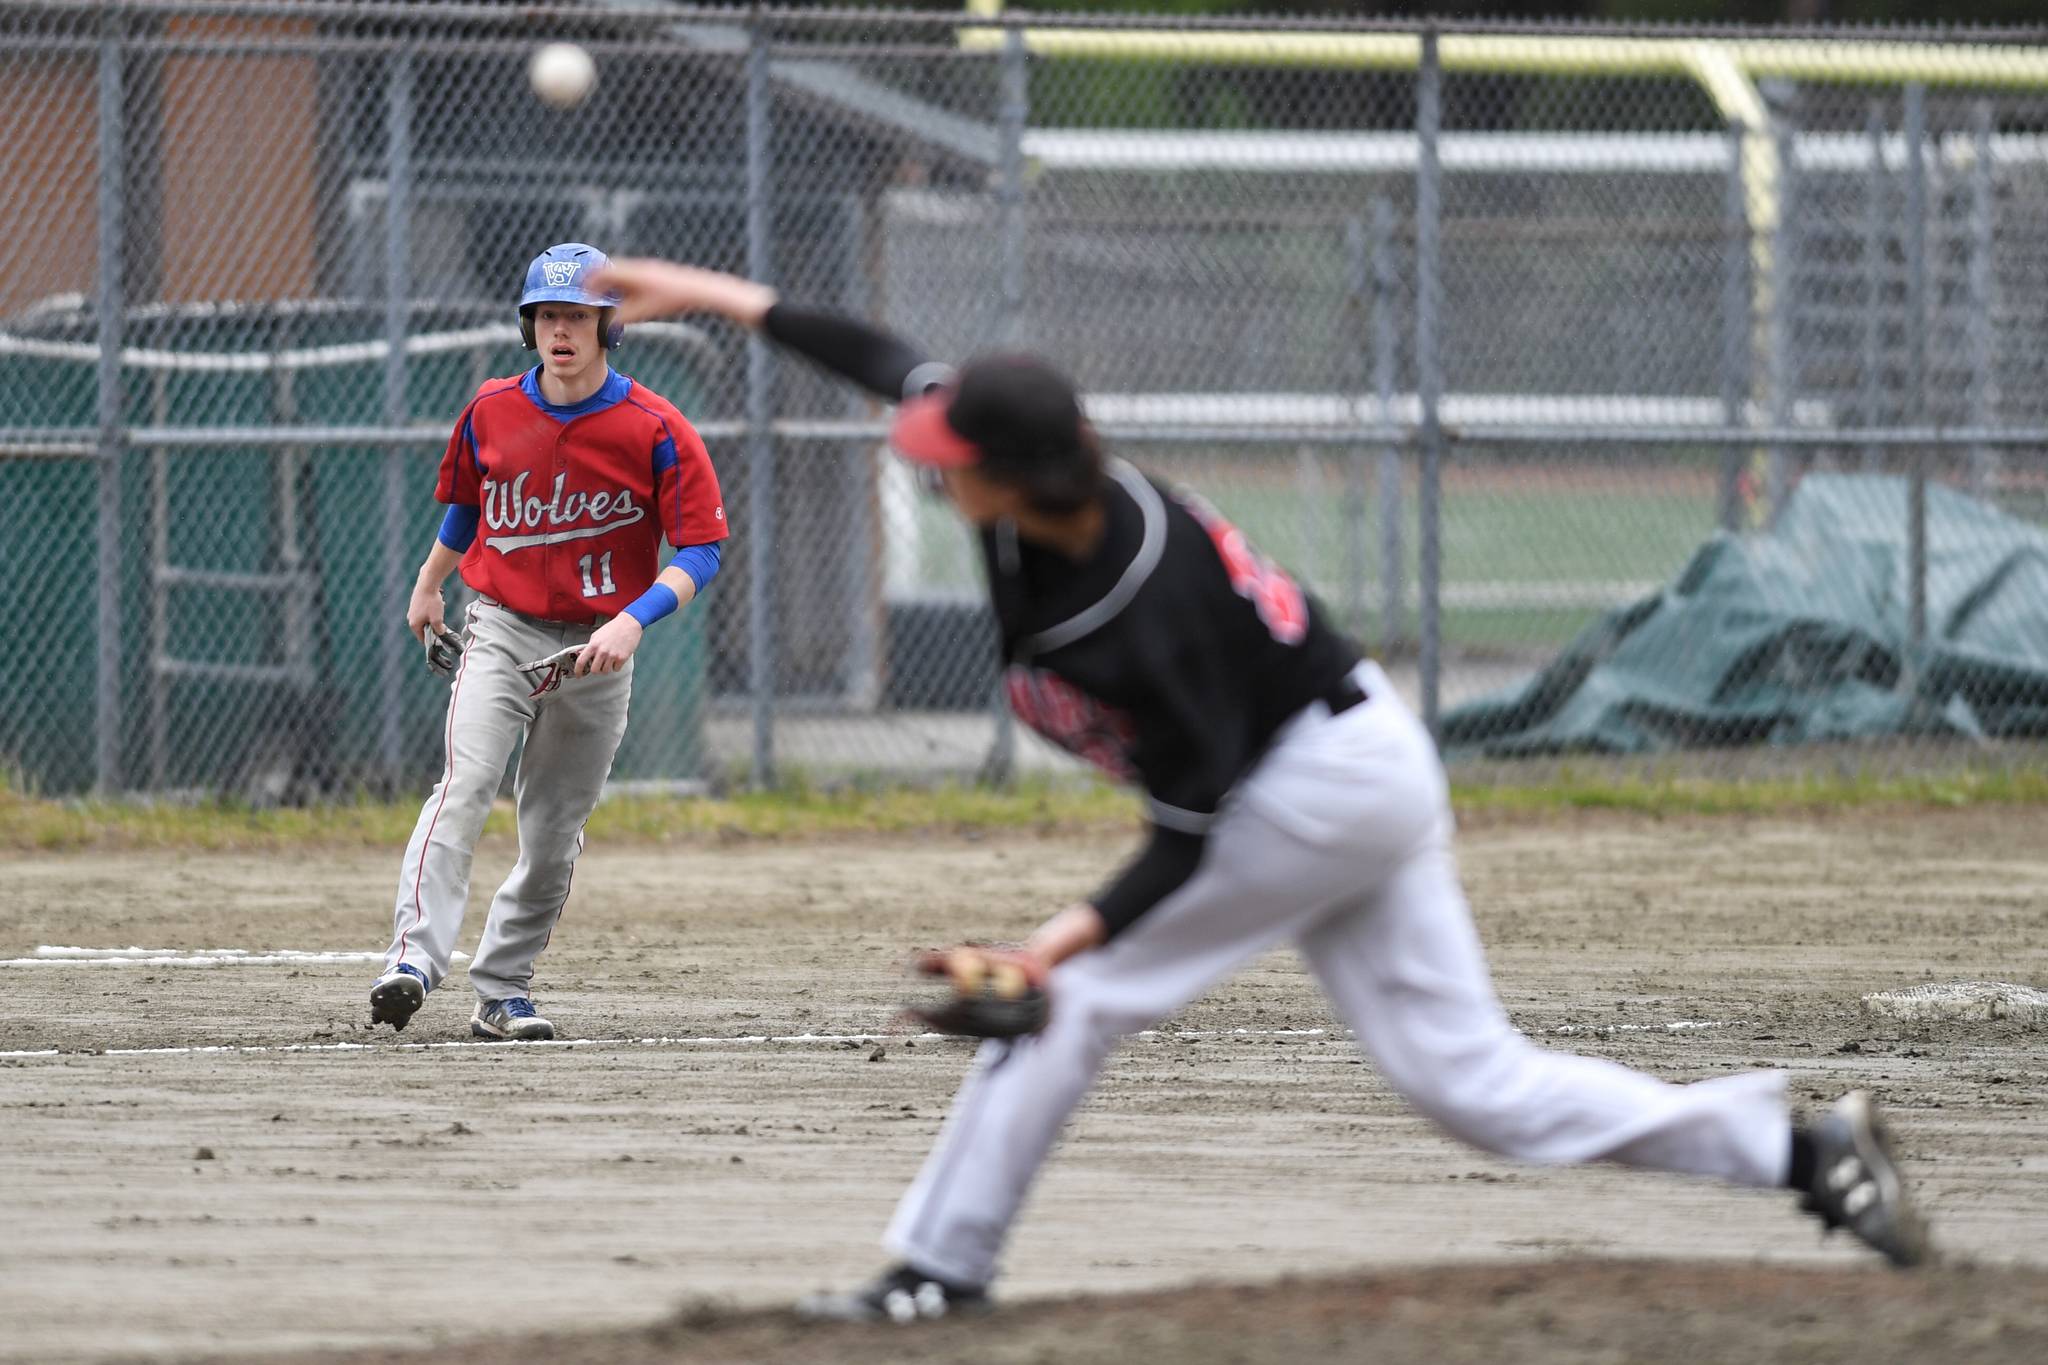 Sitka’s base runner Brayden Massey-Jones watches from third base as Juneau-Douglas’ Garrett Bryant pitches in the first inning during the Region V Baseball Championship at Adair-Kennedy Memorial Park on Thursday, May 23, 2019. (Michael Penn | Juneau Empire)